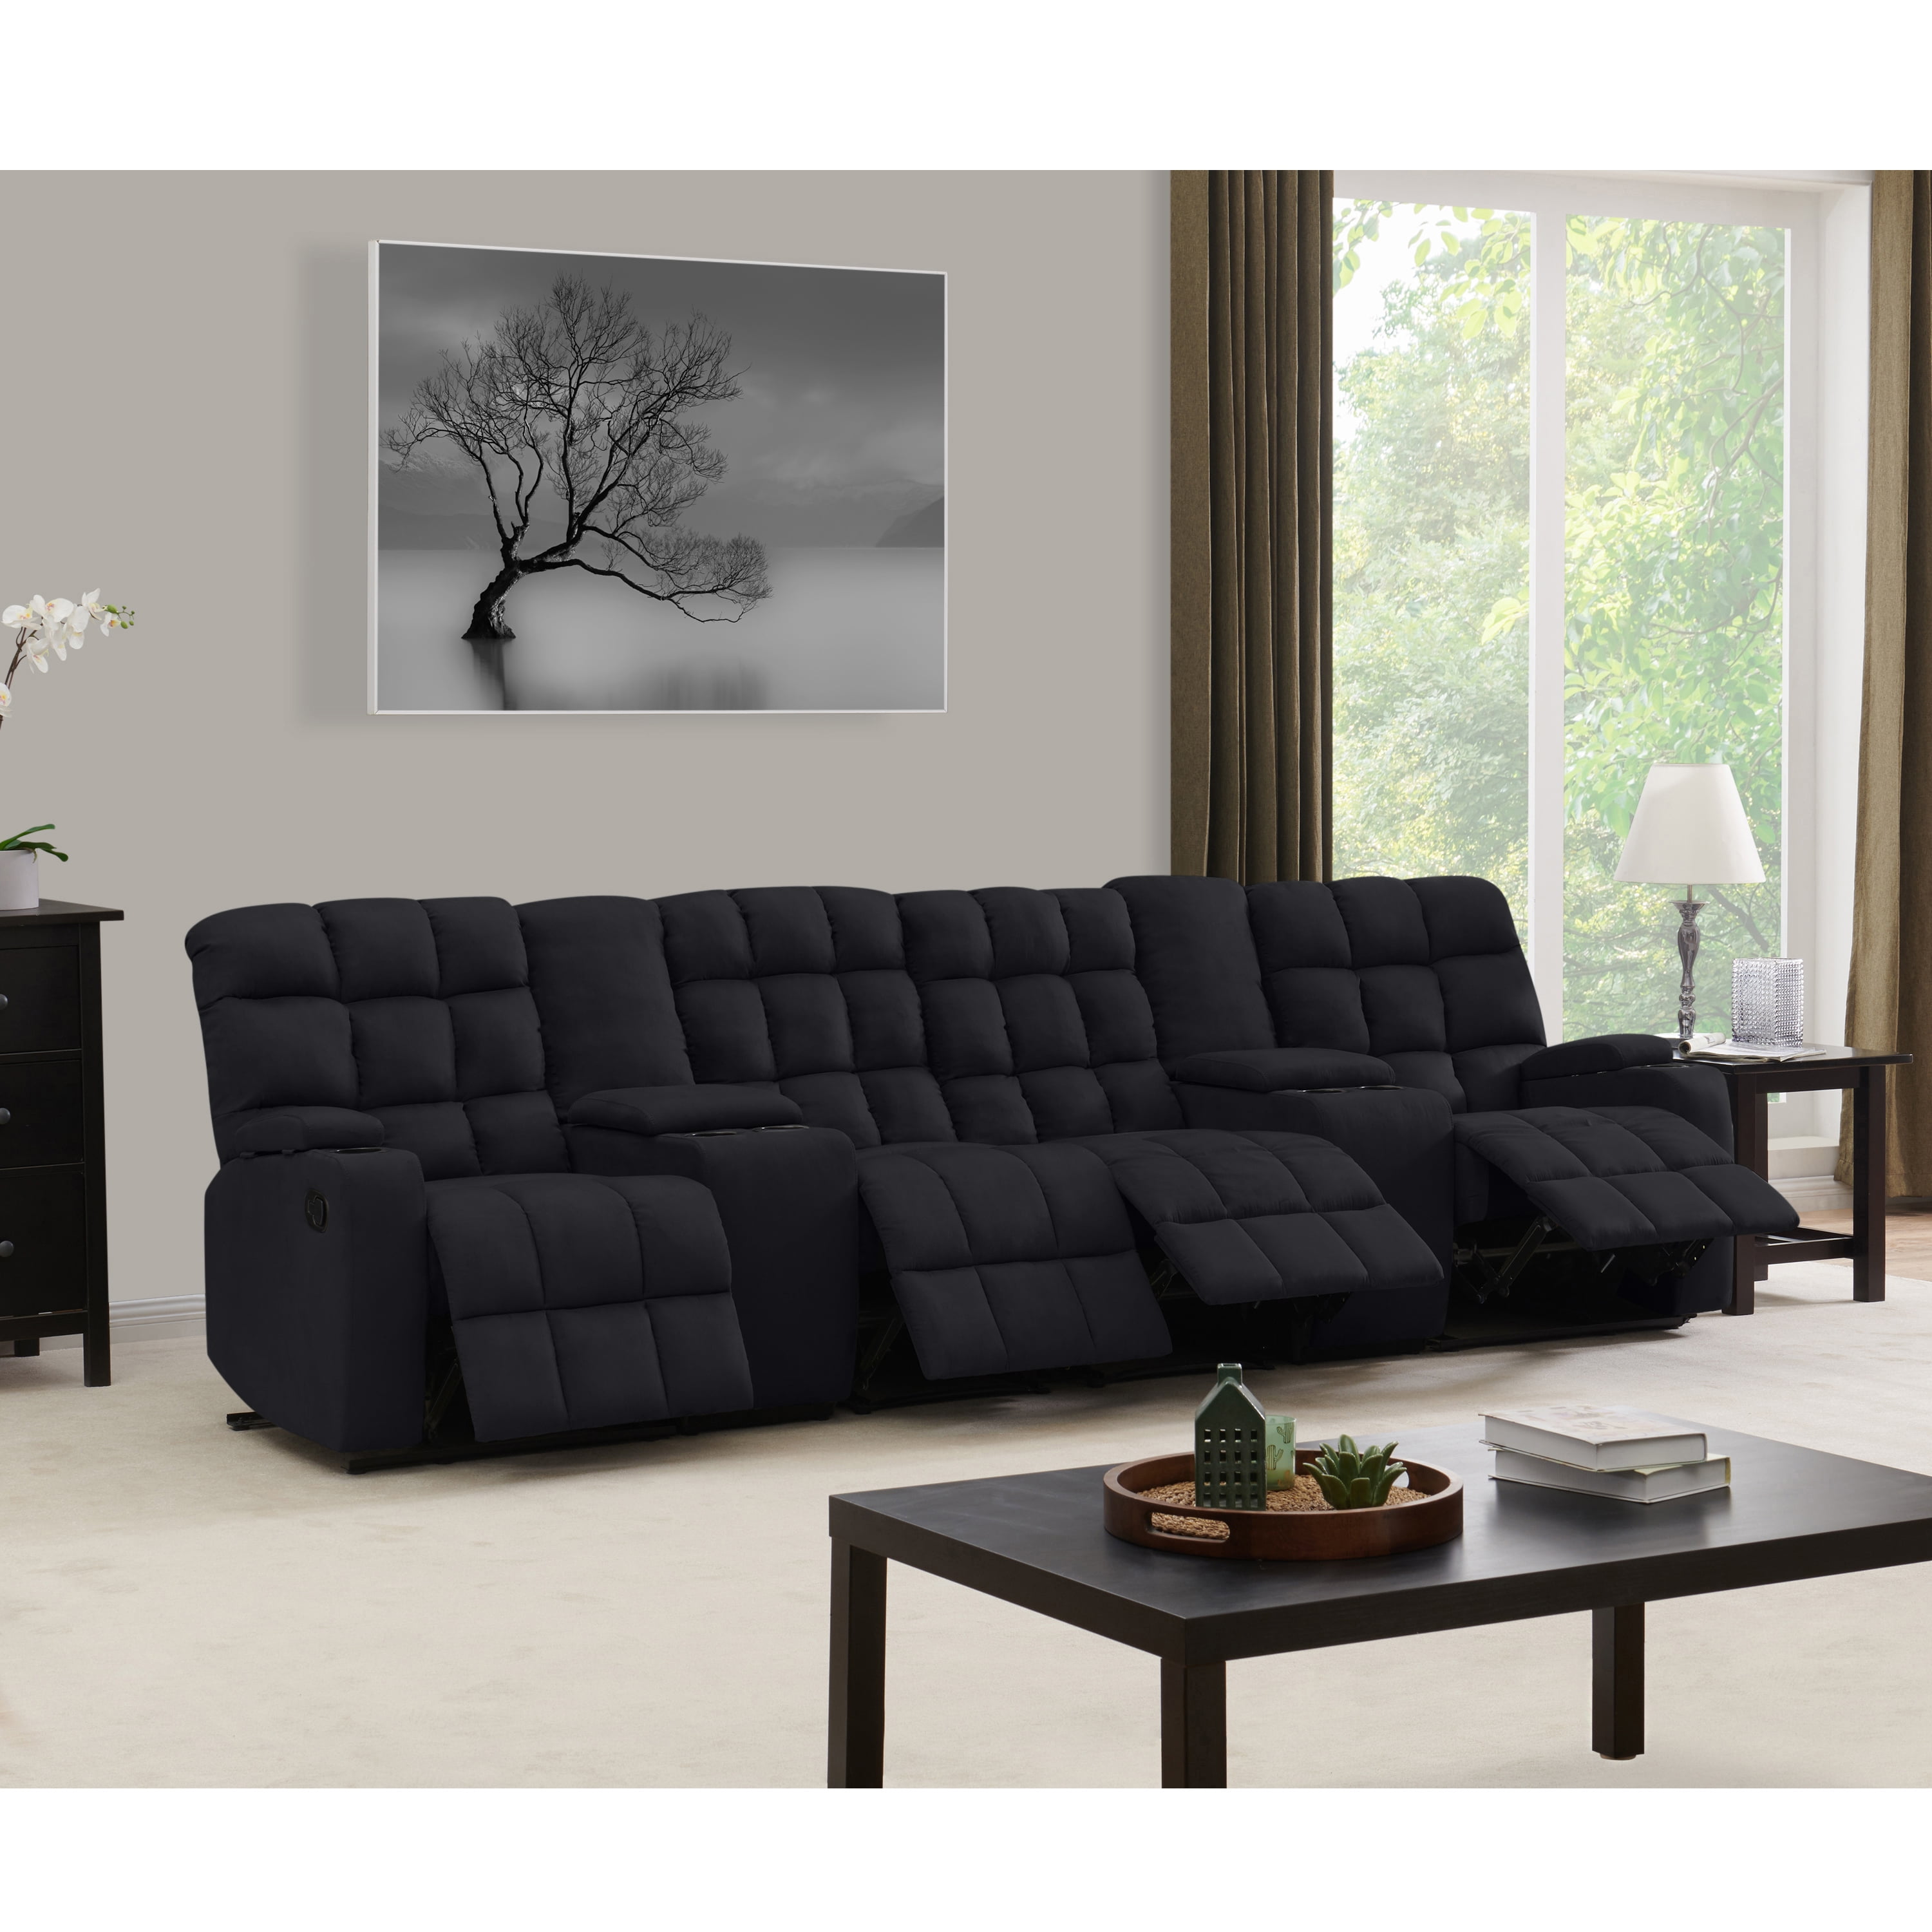 Homesvale Recliner Sofa With Power